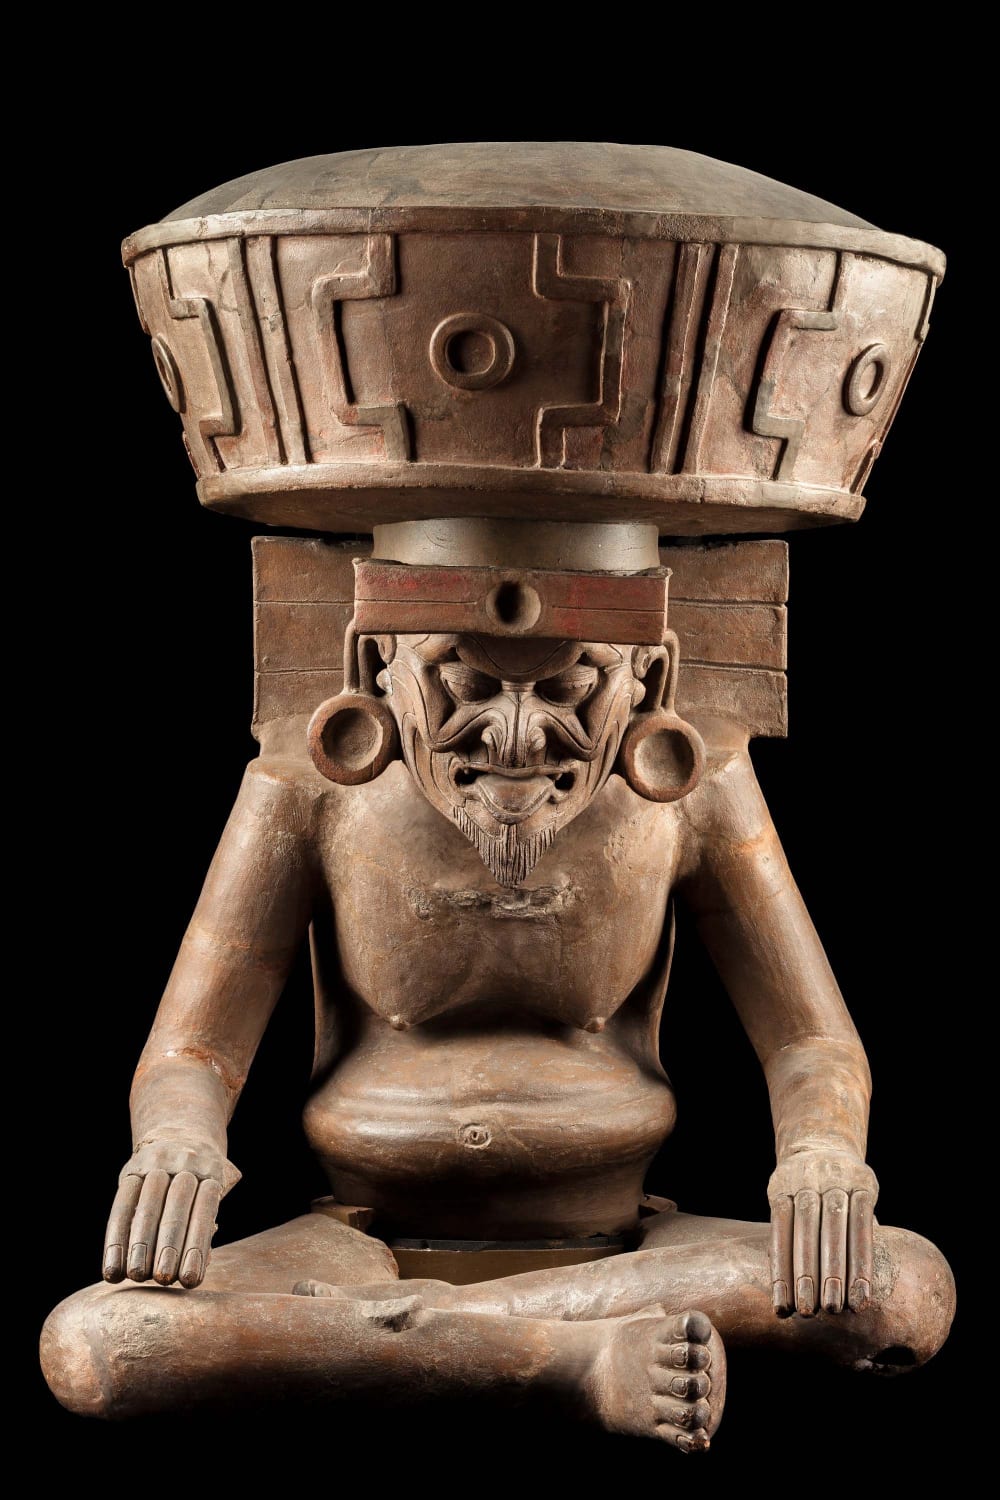 A statue of Huehuetéotl, the aged god of fire of the prehispanic pantheon. Now on n display at the National Museum of Anthropology in Mexico City